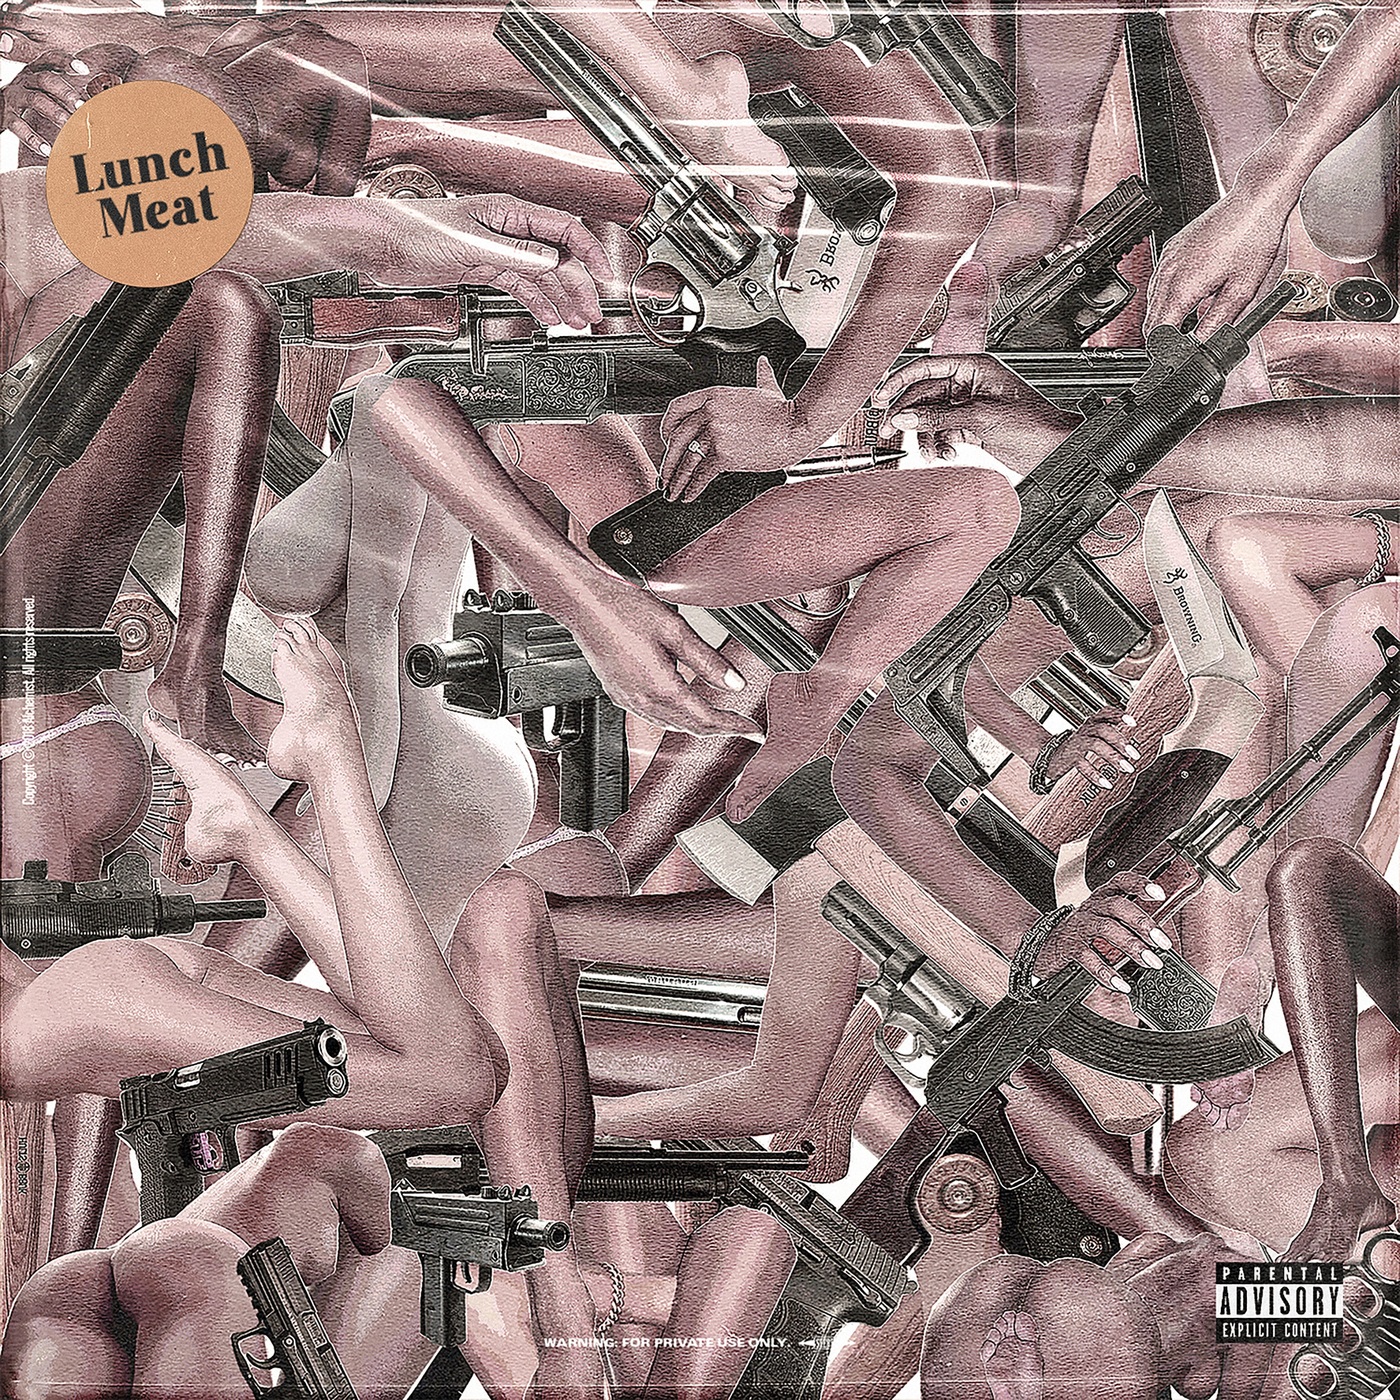 The Alchemist – Lunch Meat